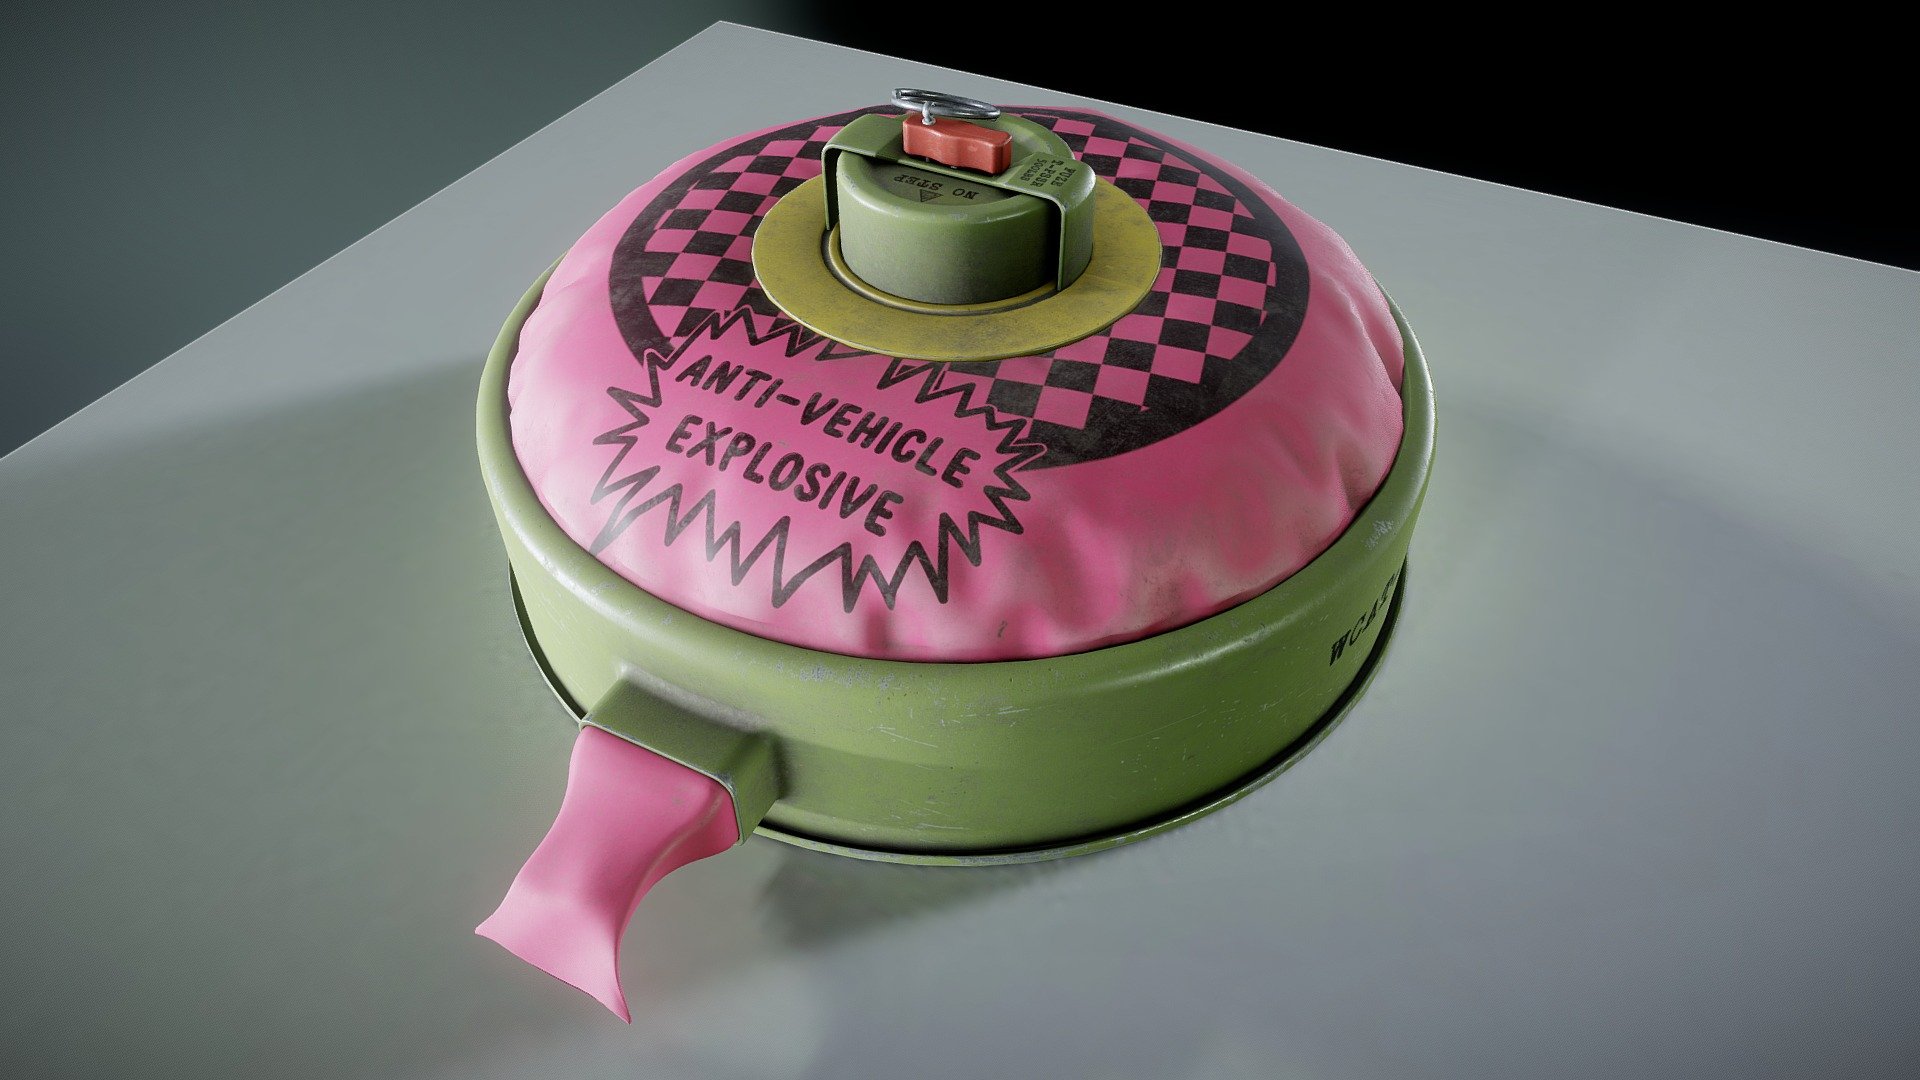 Introducing the Whoopee Cushion AT-15 landmine! The super silliest way to damage or disable heavily armored vehicles! - Whoopee Cushion Anti-Tank Mine - 3D model by Kommander Karl (@kommanderkarl) 3d model